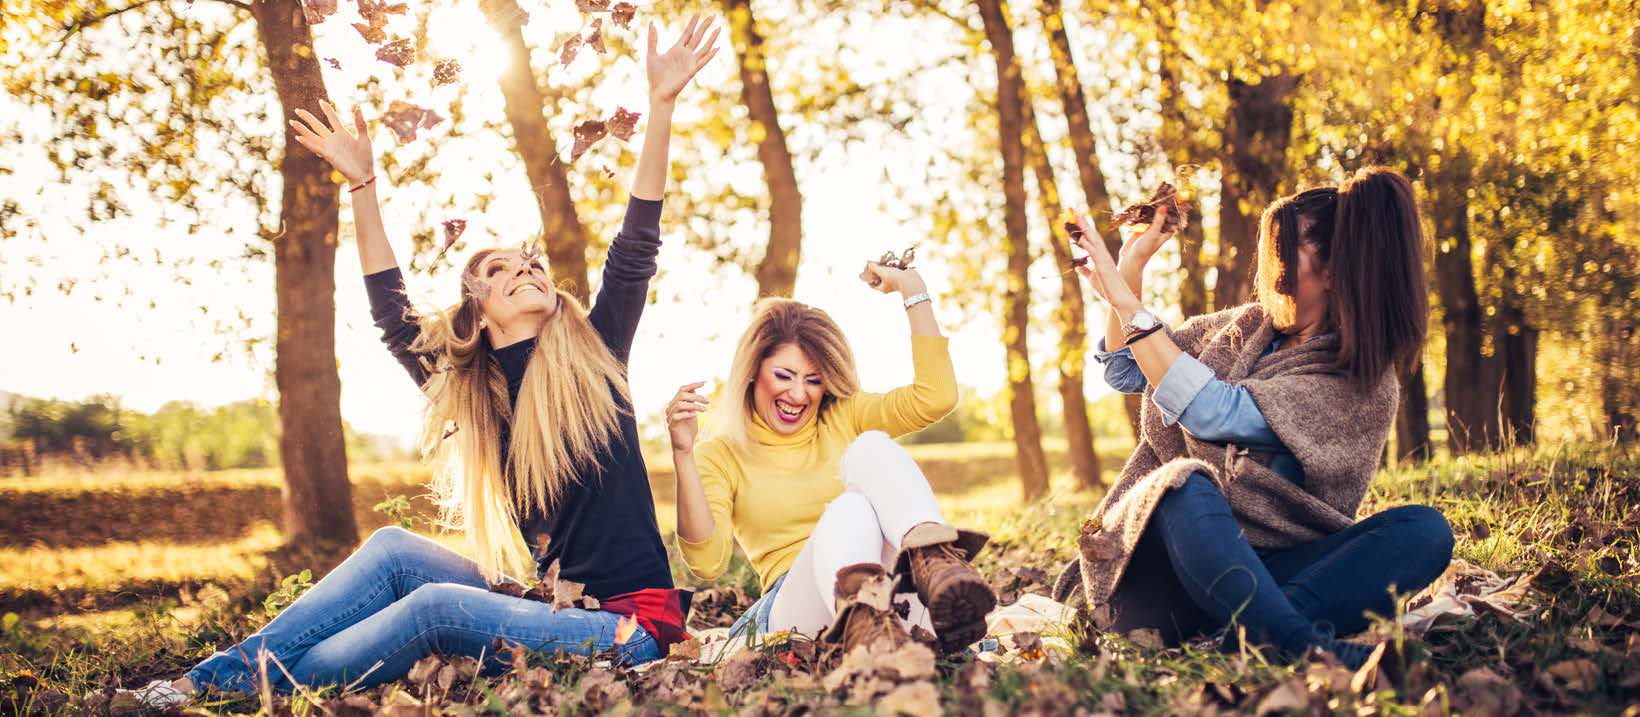 Three White women sitting in park throwing leaves in air and laughing